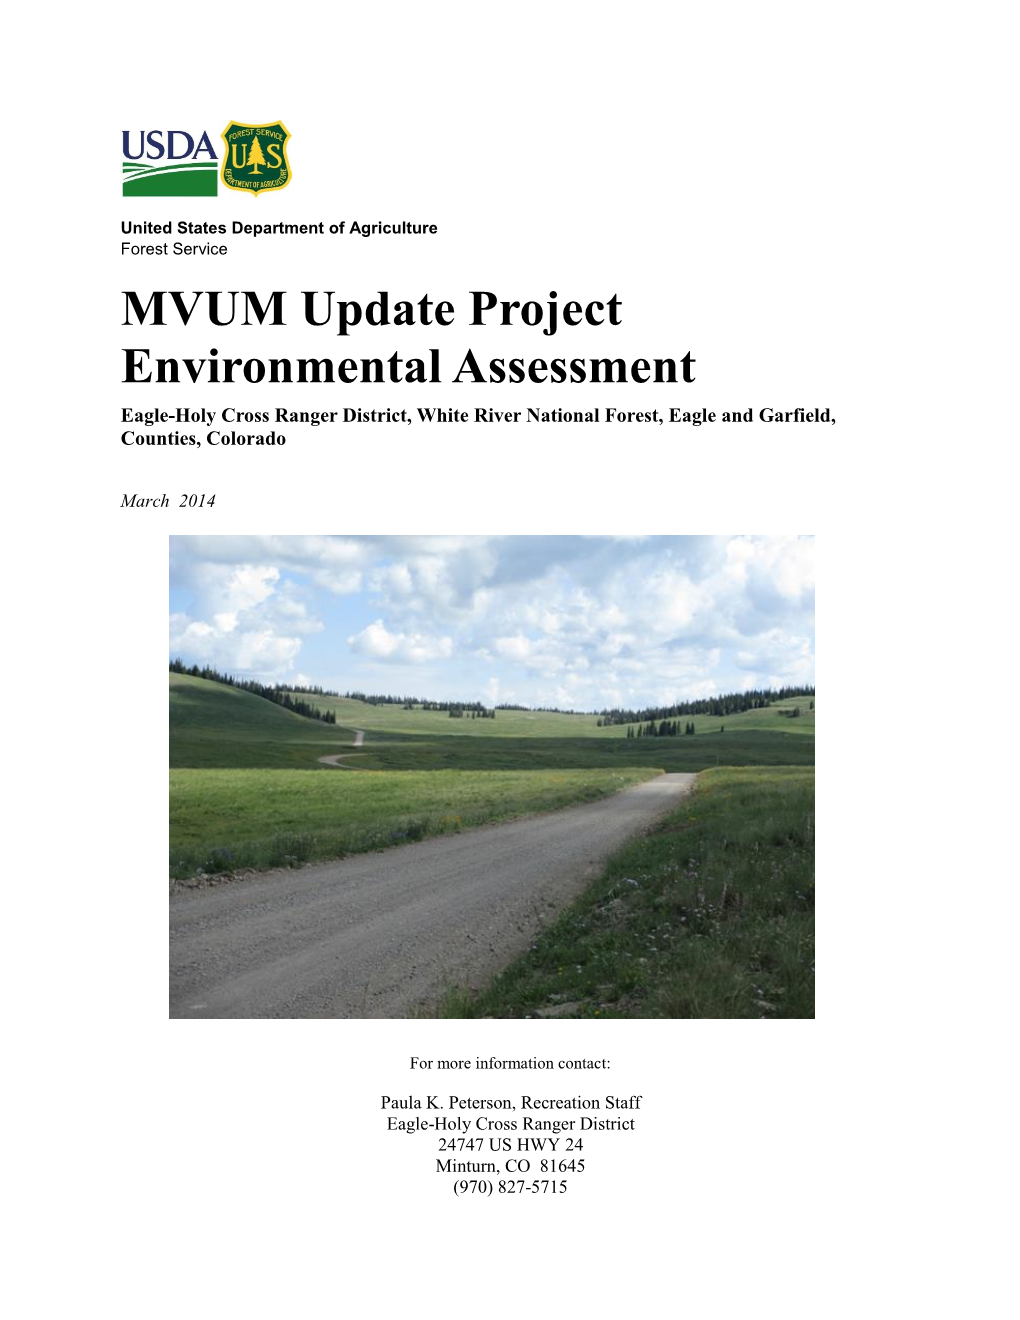 MVUM Update Project Environmental Assessment Eagle-Holy Cross Ranger District, White River National Forest, Eagle and Garfield, Counties, Colorado